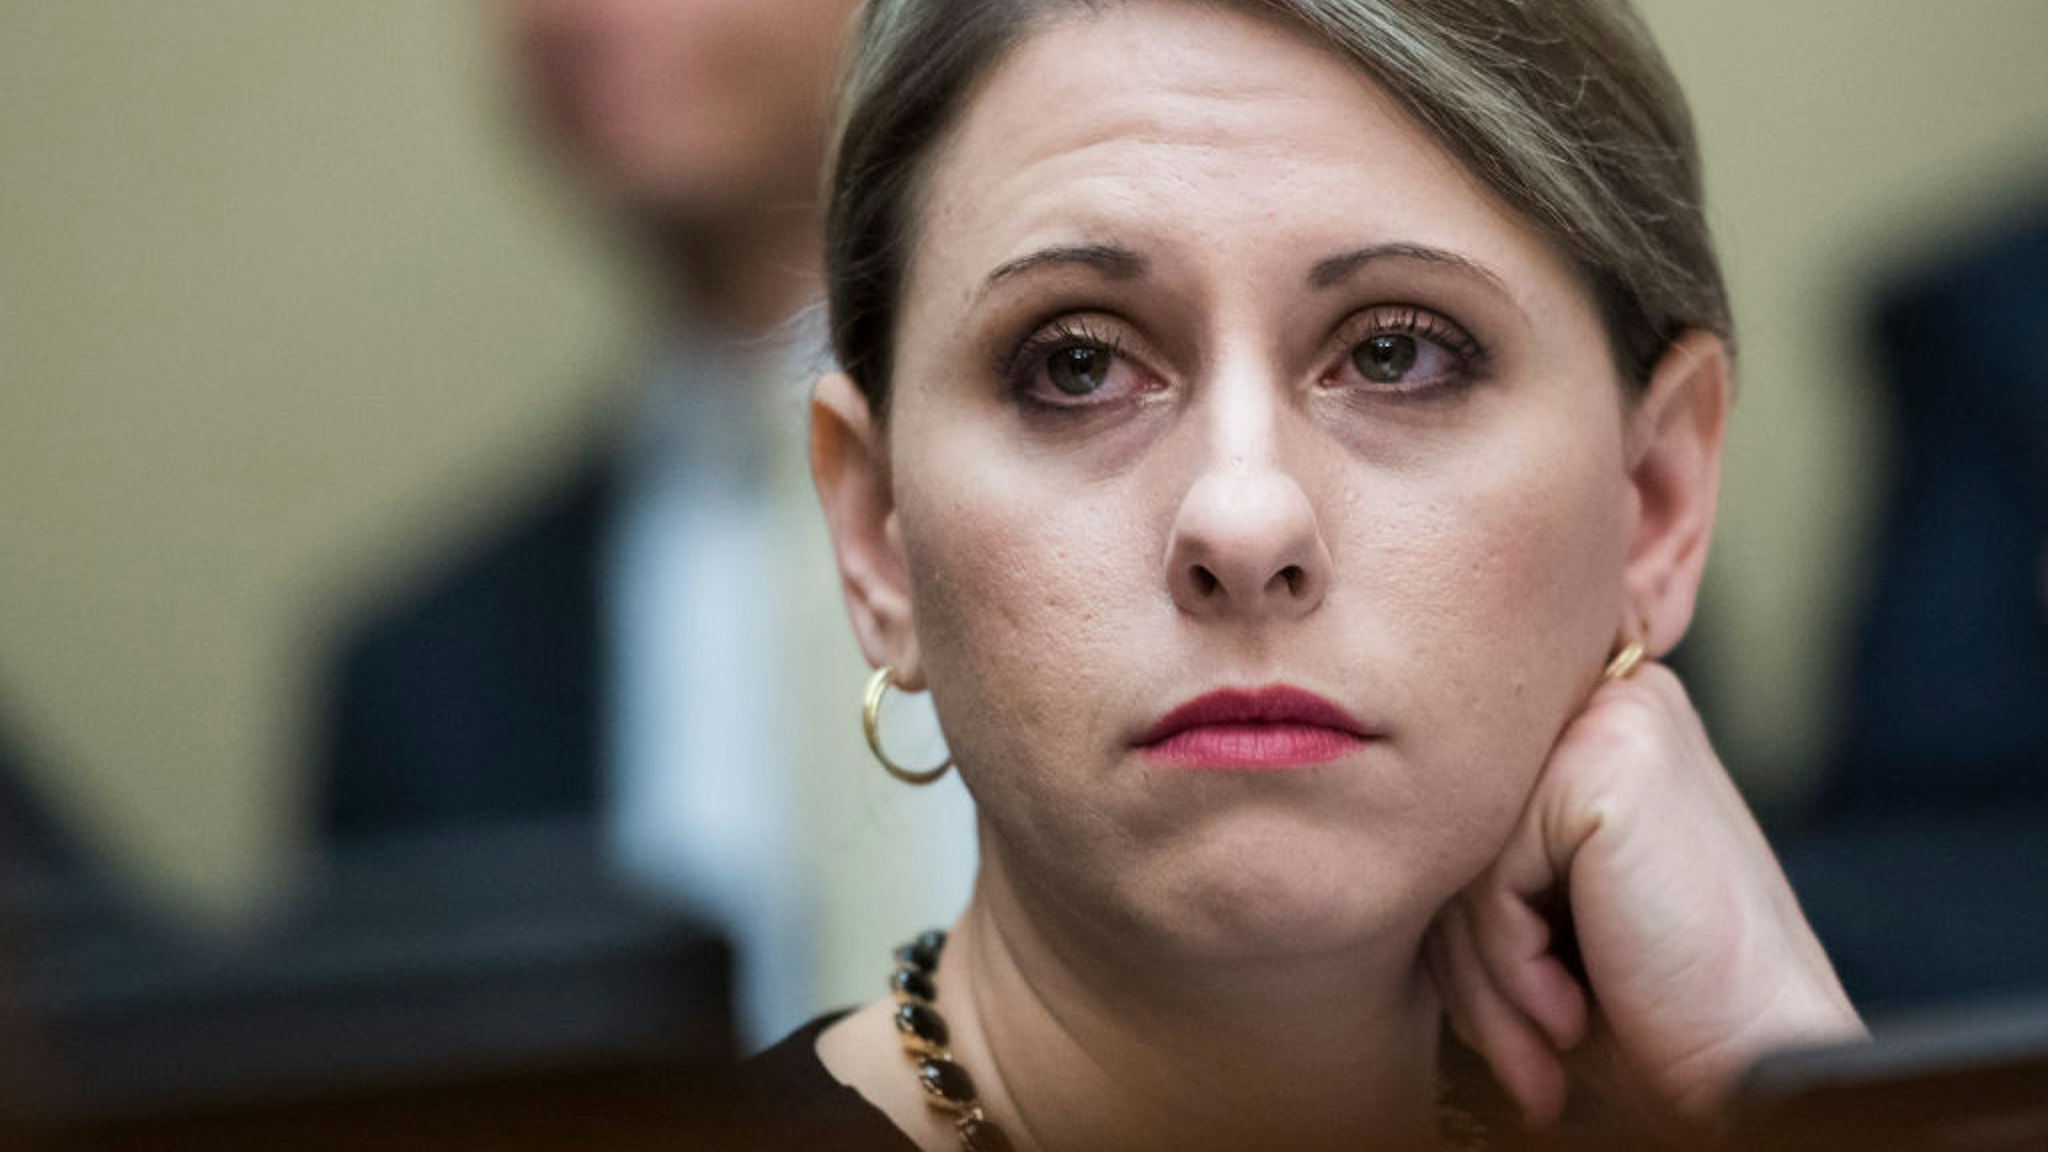 Rep. Katie Hill, D-Calif., is seen during a House Oversight and Reform Committee hearing in Rayburn Building to discuss preparations for the 2020 Census and citizenship questions on Thursday March 14, 2019.